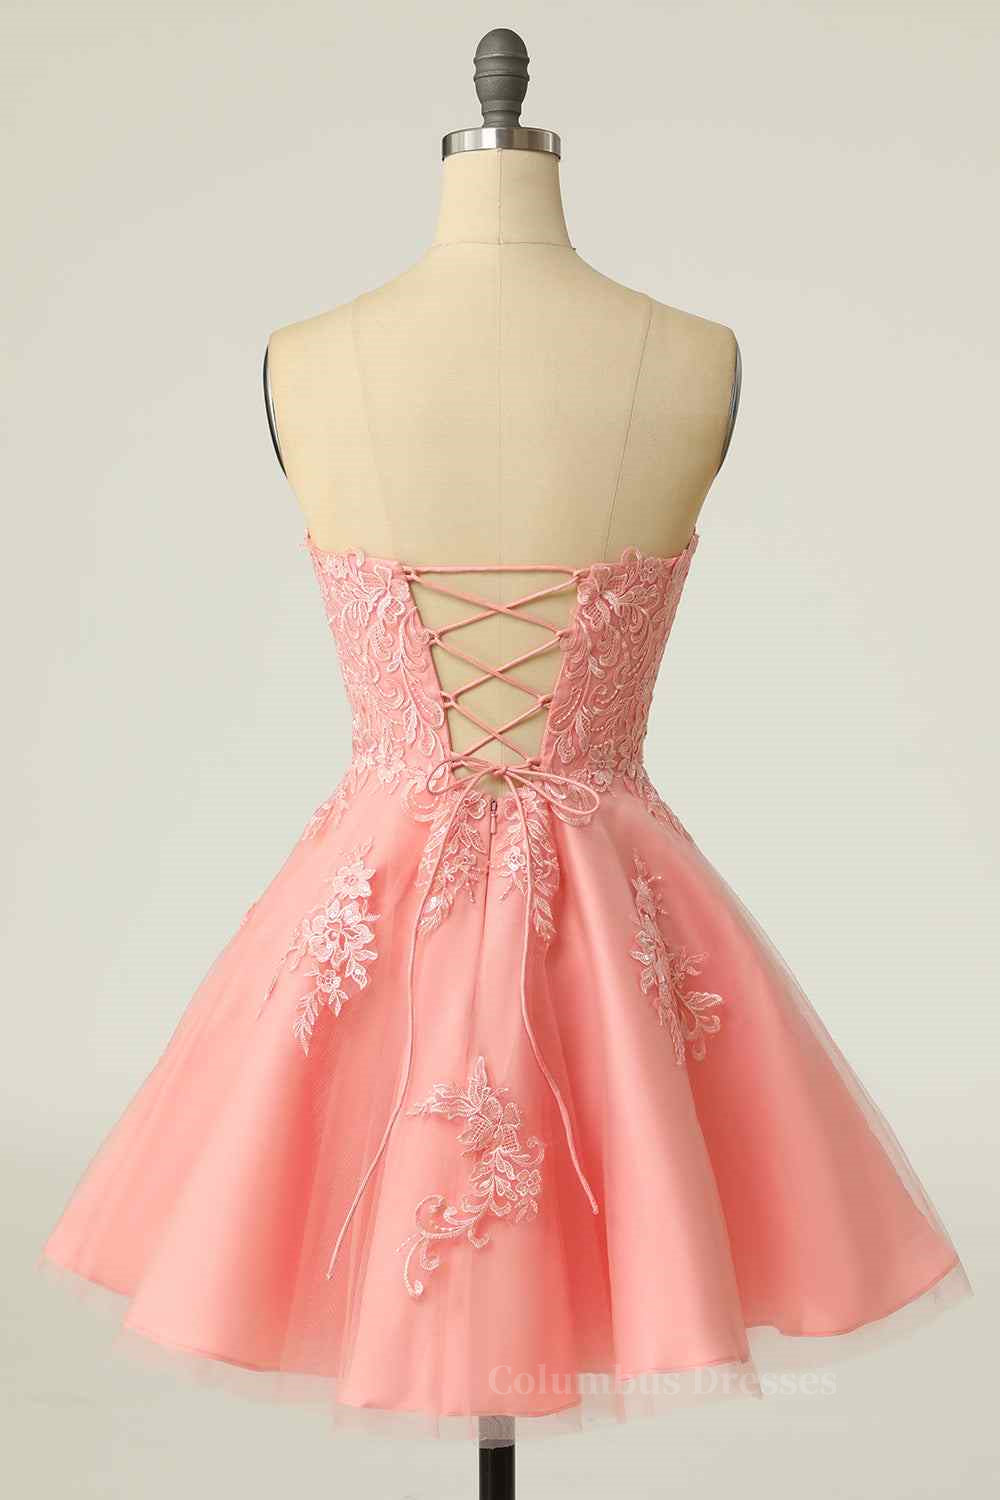 Bridesmaids Dresses Modest, Pink A-line Strapless Lace-Up Back Applique Tulle Mini Homecoming Dress